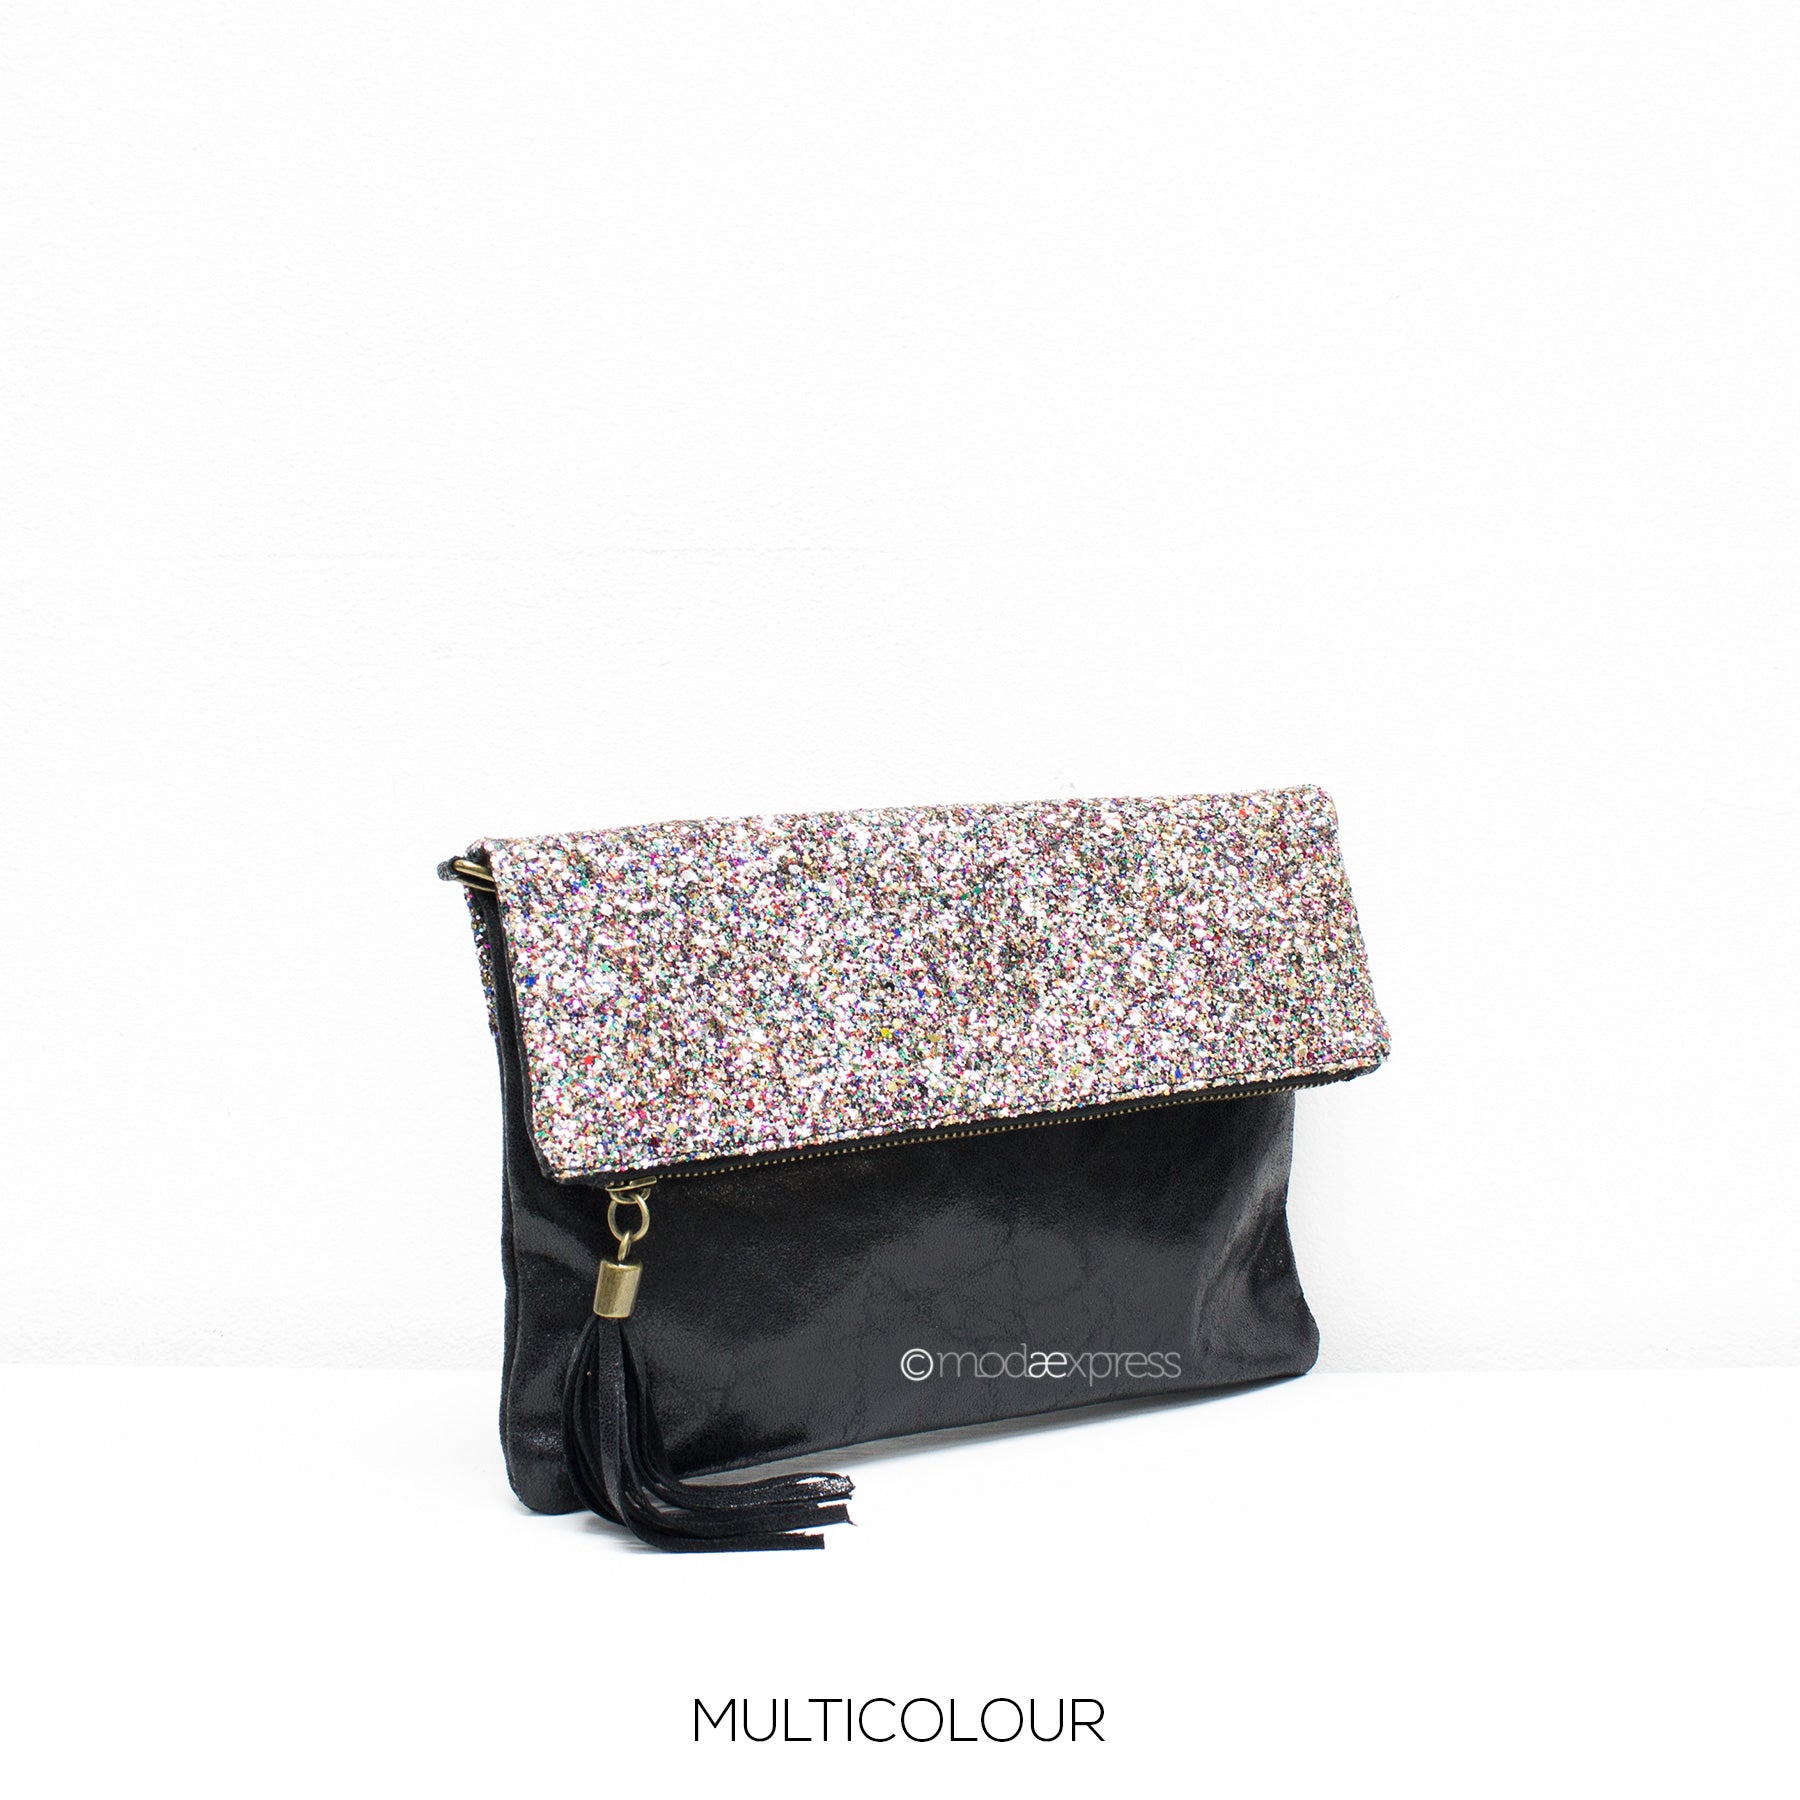 Black leather bag with multicolour glitter fold over and black tassel